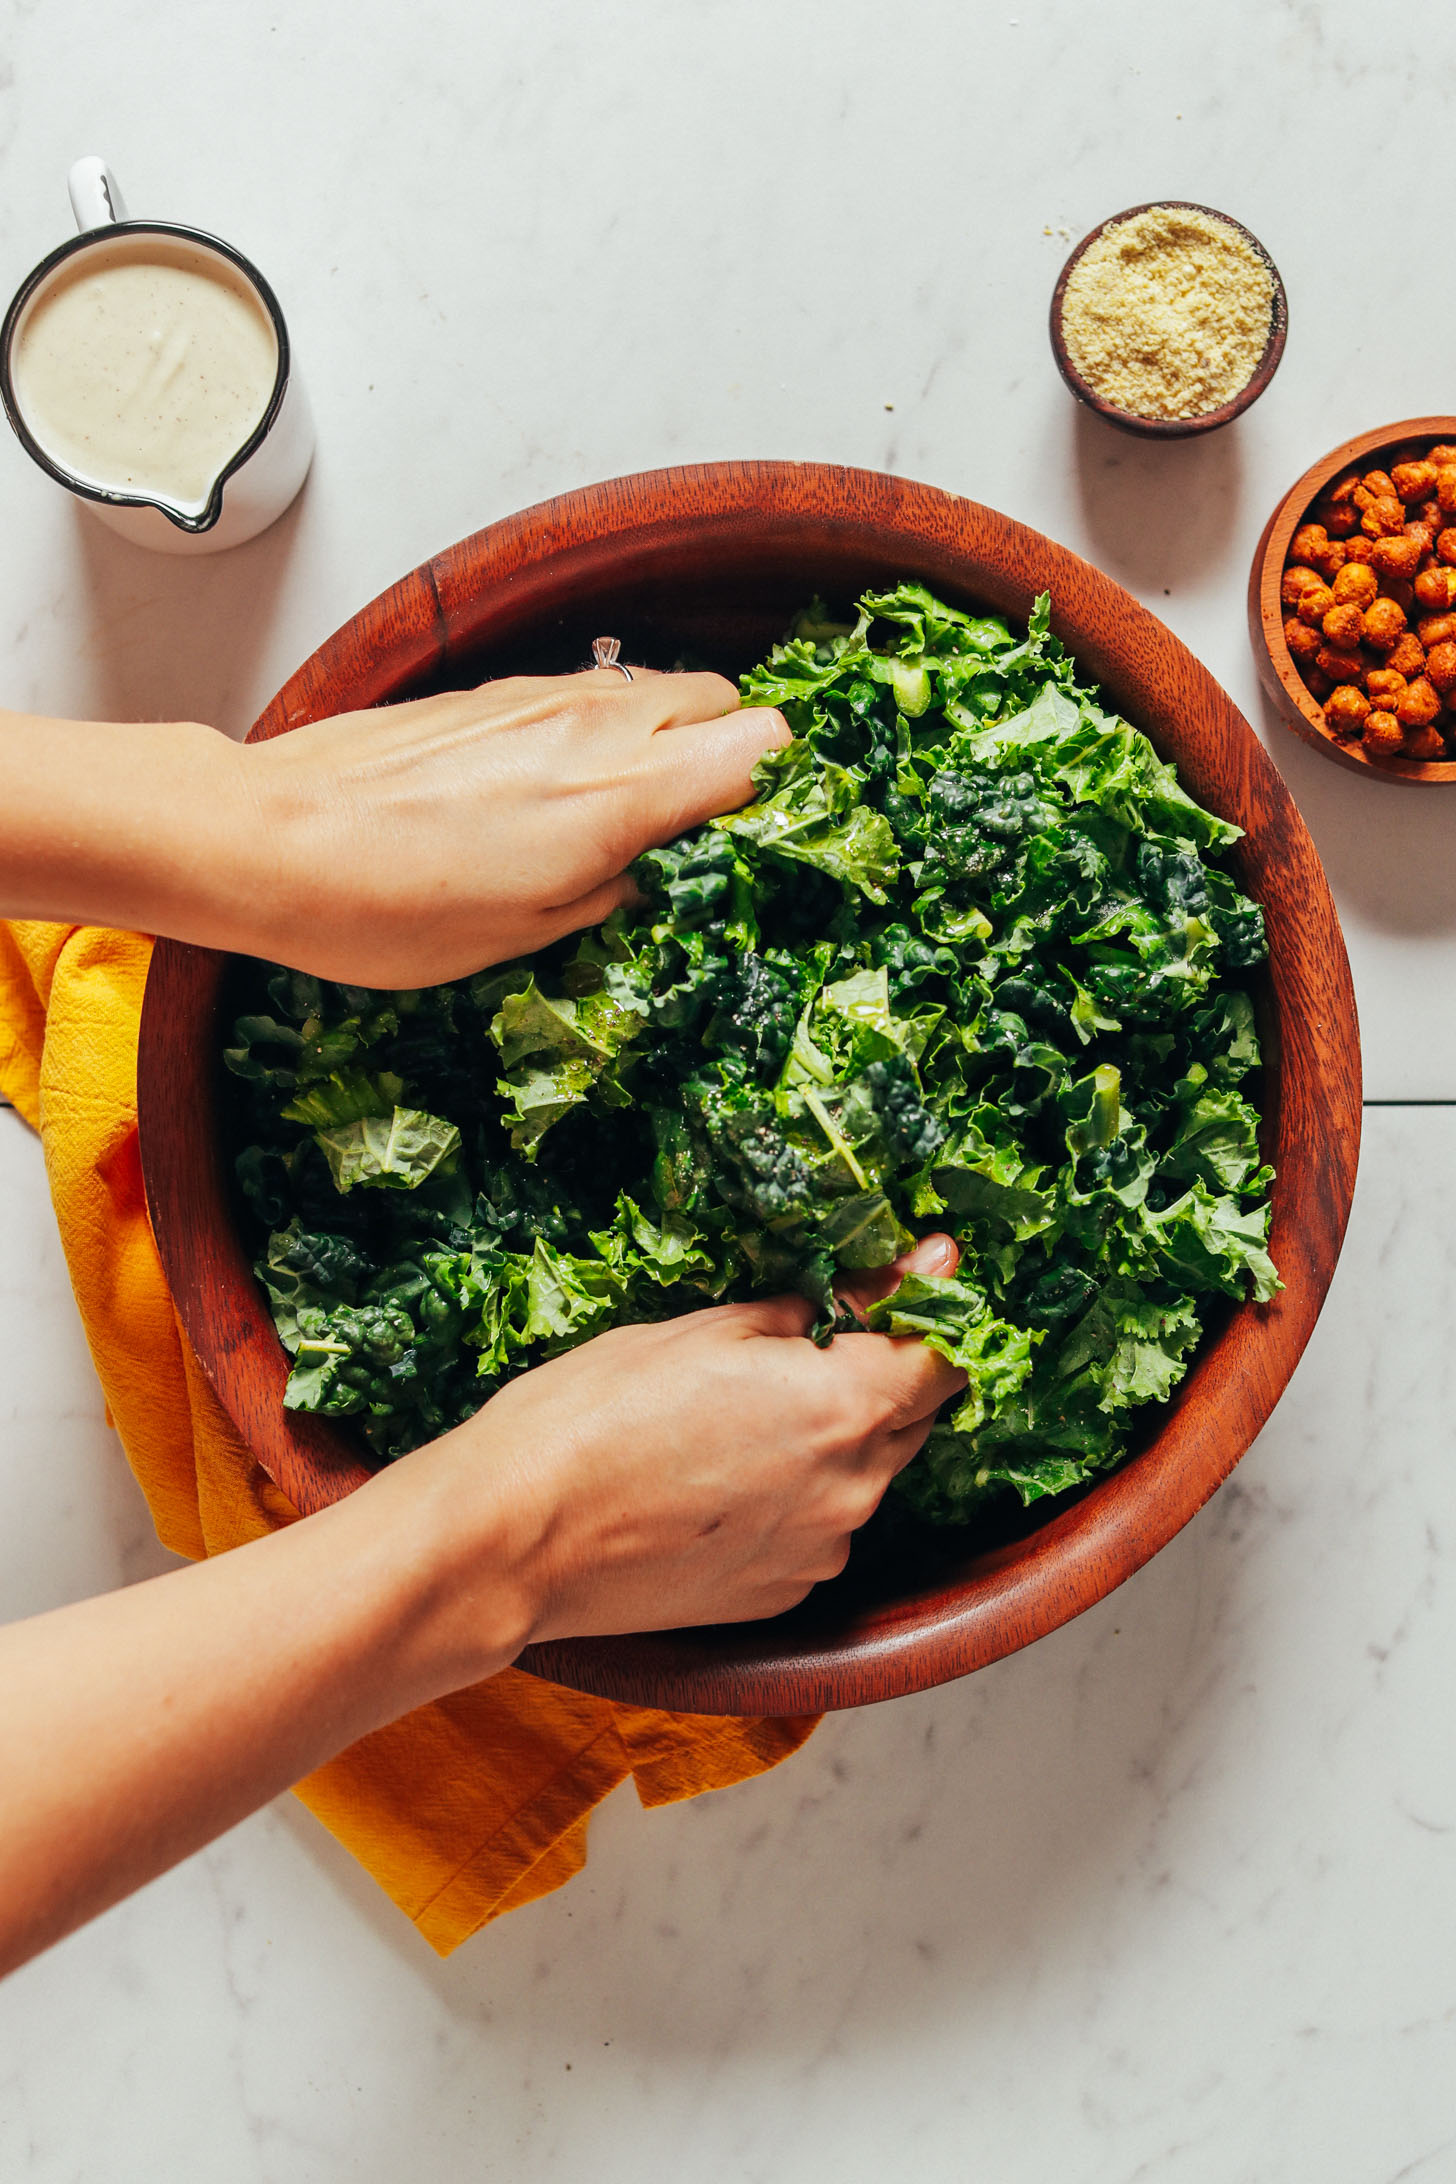 Using our hands to massage a bowl of kale for Chickpea Kale Caesar Salad